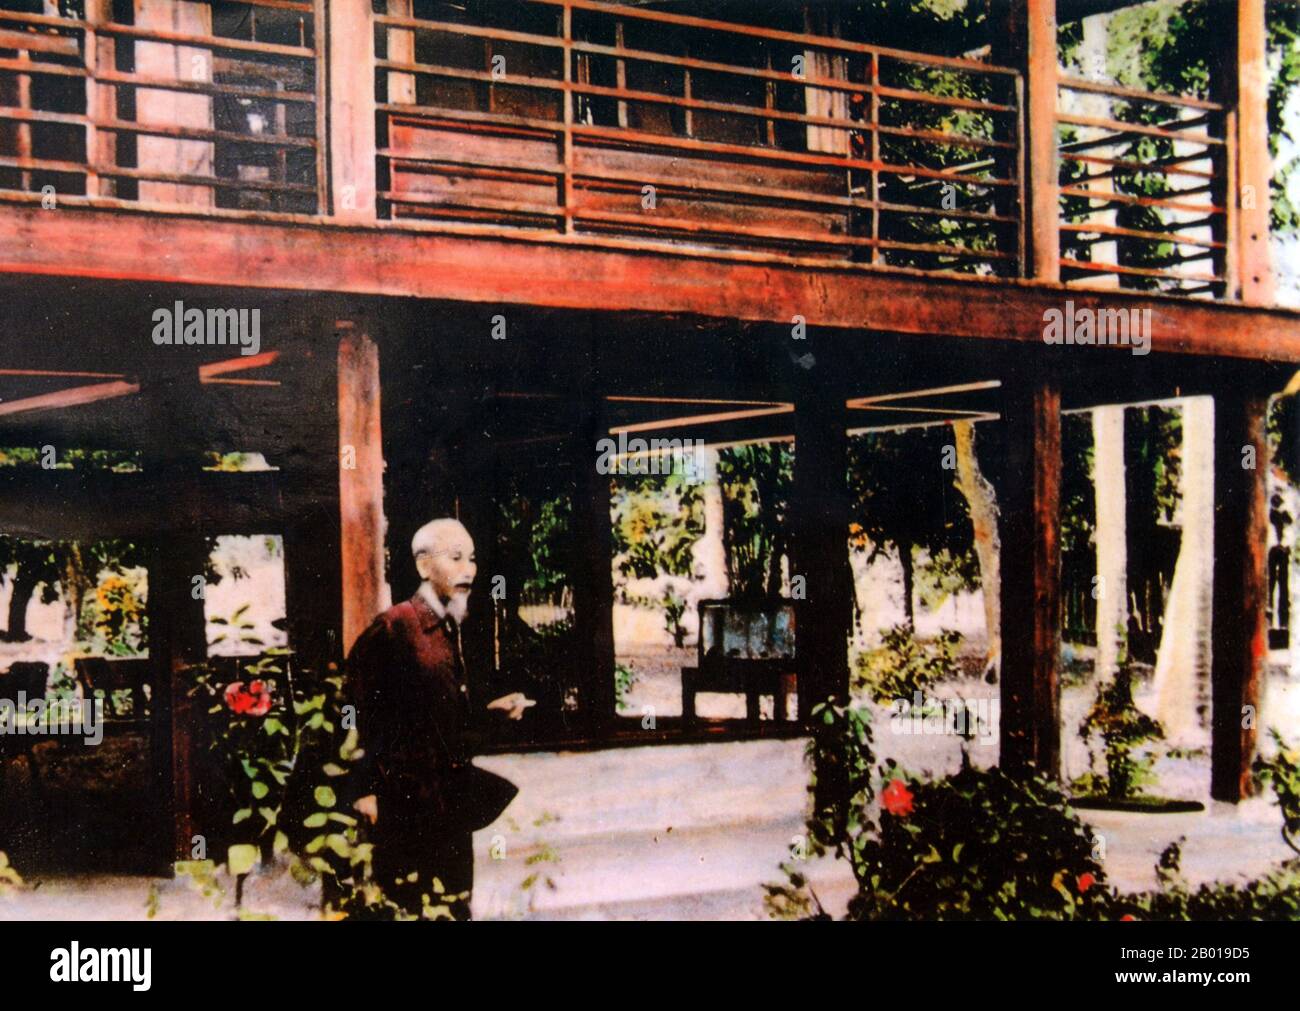 Vietnam: President Ho Chi Minh (19 May 1890 - 3 September 1969) in front of his wooden house in the grounds of the Presidential Palace, Hanoi, c. 1960.  Hồ Chí Minh, born Nguyễn Sinh Cung and also known as Nguyễn Ái Quốc was a Vietnamese Communist revolutionary leader who was prime minister (1946-1955) and president (1945-1969) of the Democratic Republic of Vietnam (North Vietnam). He formed the Democratic Republic of Vietnam and led the Viet Cong during the Vietnam War until his death. Stock Photo